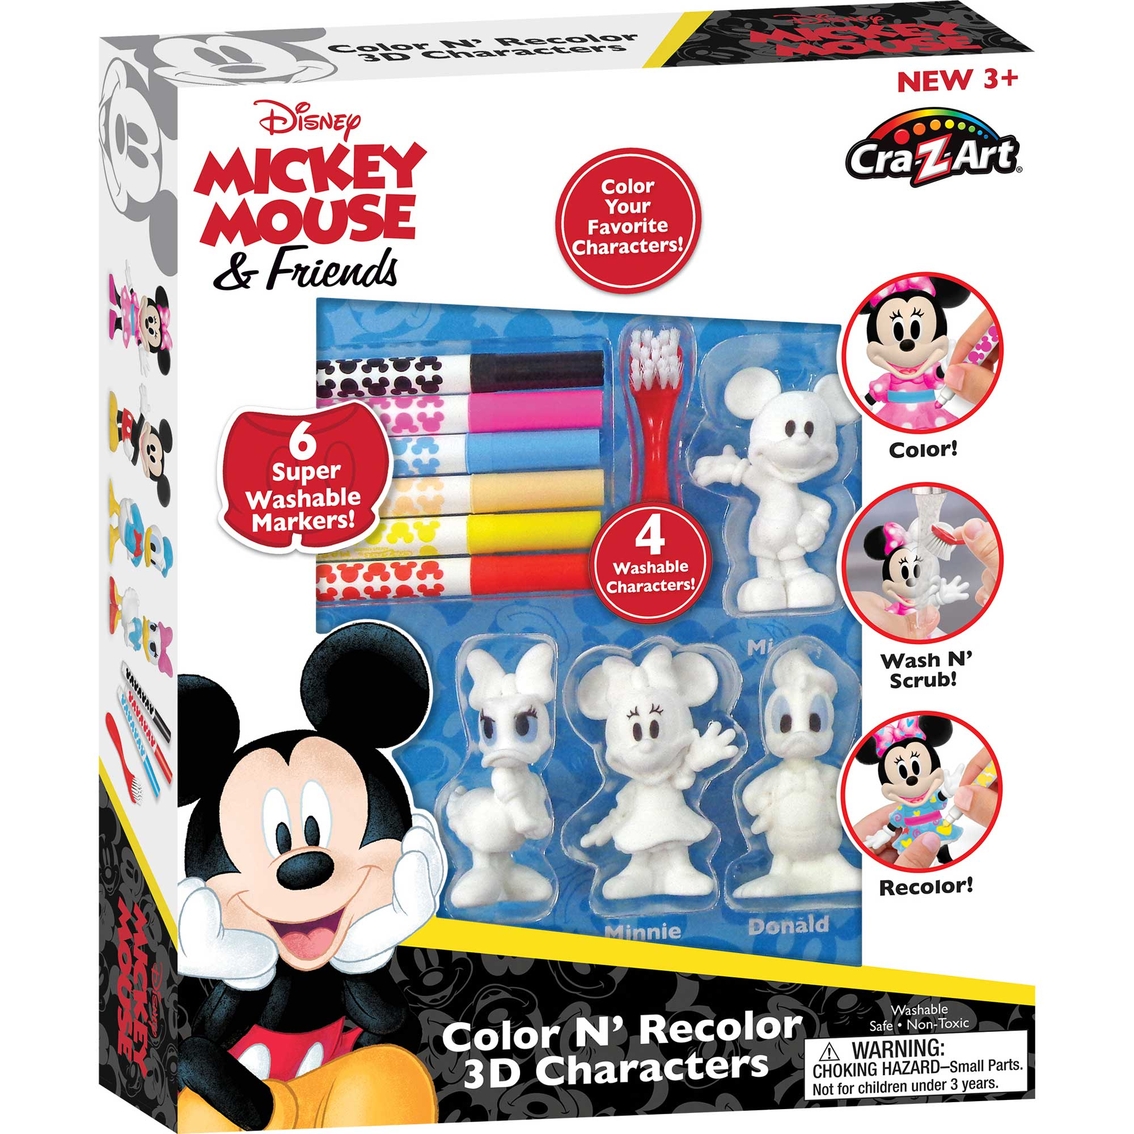 Cra-Z-Art Disney Mickey Mouse and Friends Color N' Recolor 3D Characters Set - Image 3 of 9